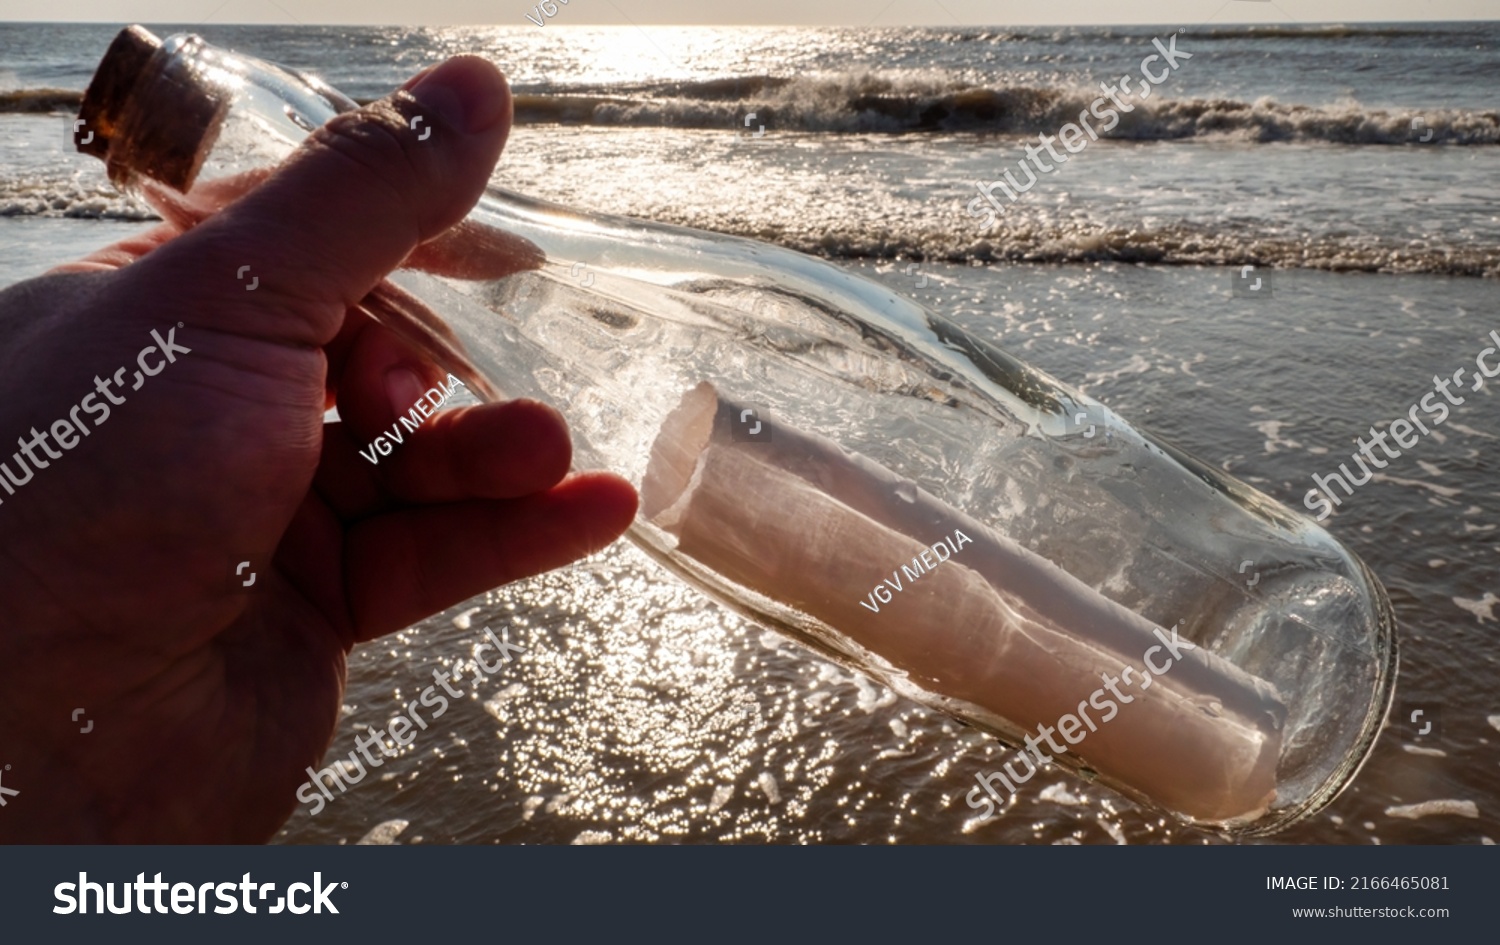 A message in a bottle washed up on the beach by waves #2166465081